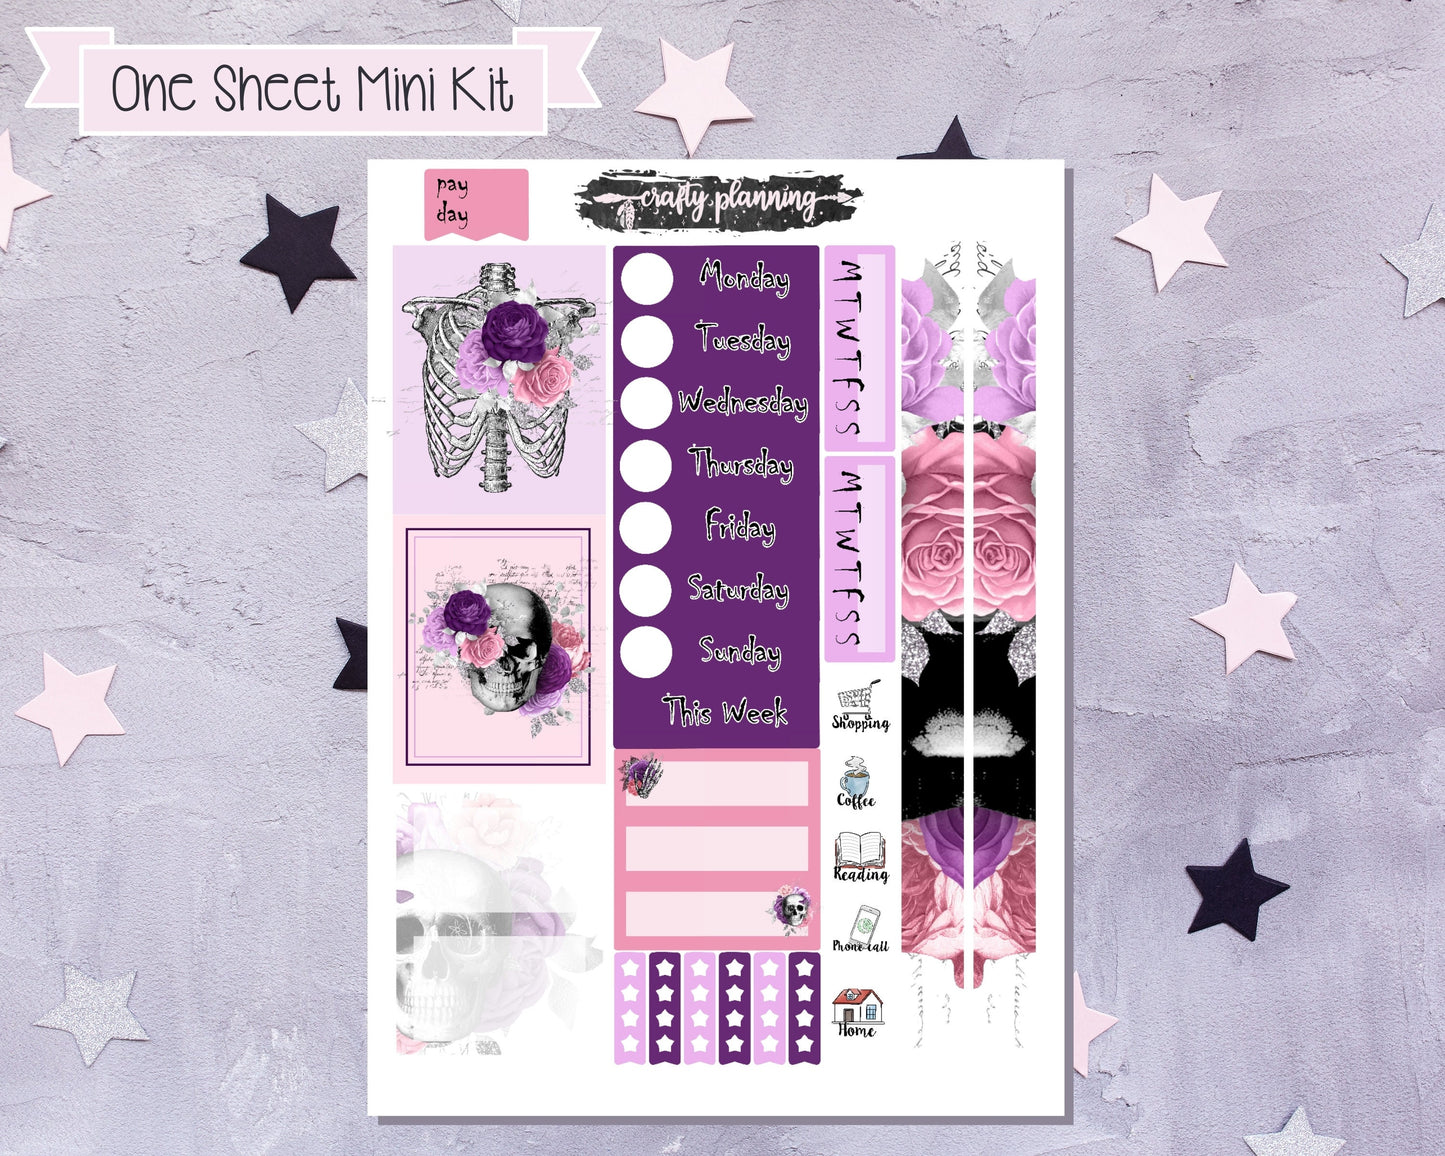 Skeleton Mini Kit, One Sheet Mini Kit, Gothic Stickers, Witchcraft Stickers, Skull Stickers, Planner Stickers, Pink & Purple